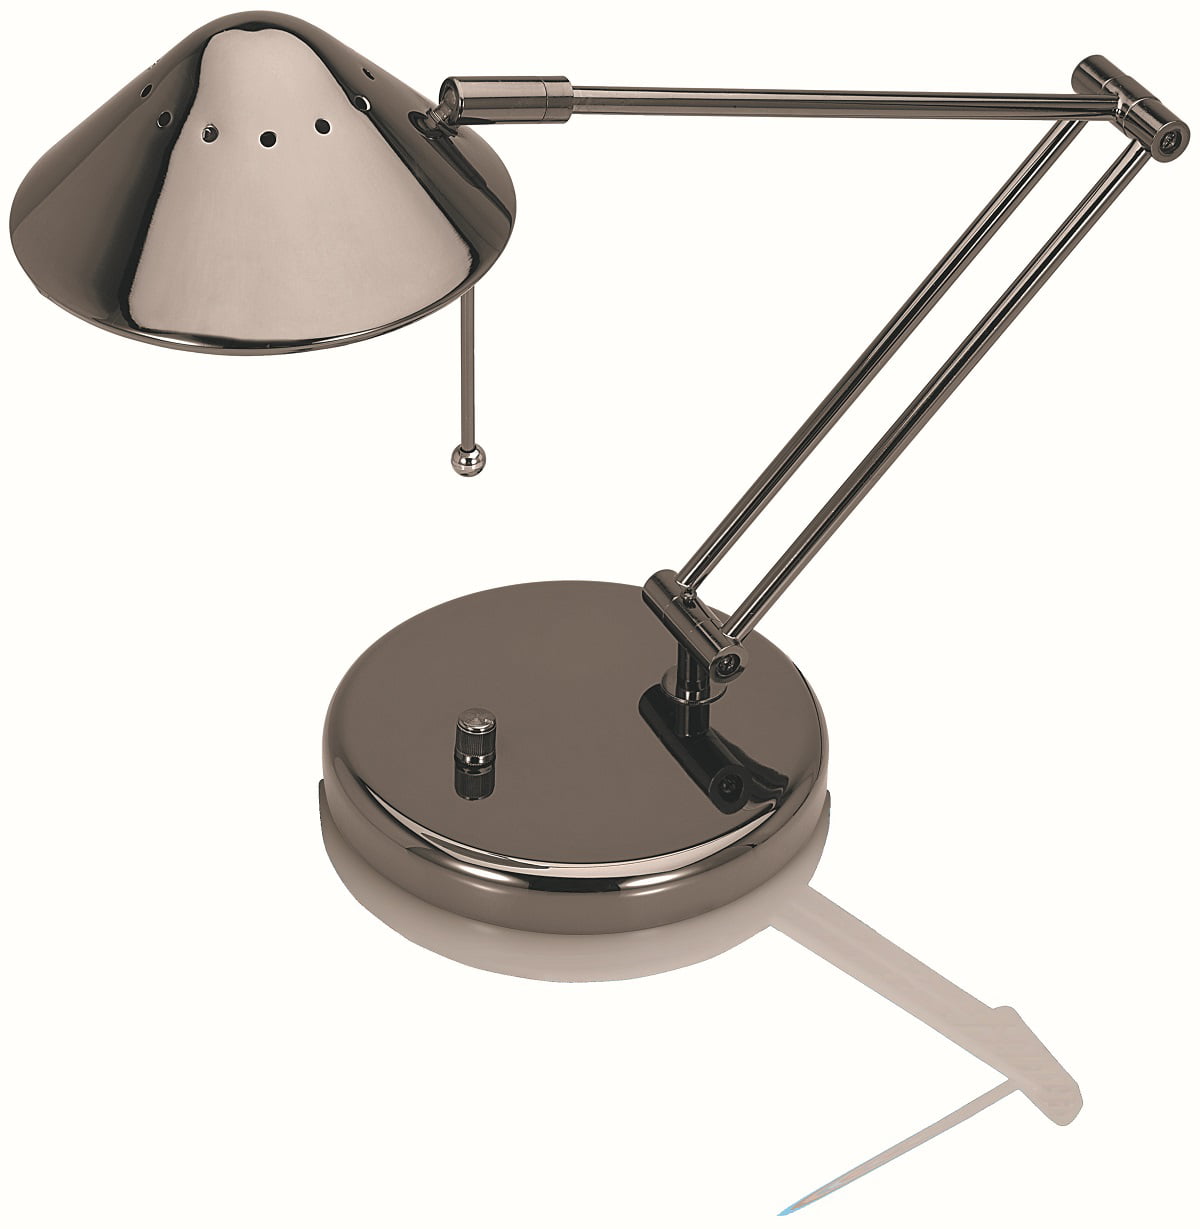 V-light Halogen Desk Lamp with 3-Point Adjustable Arm and Dimmer Switch